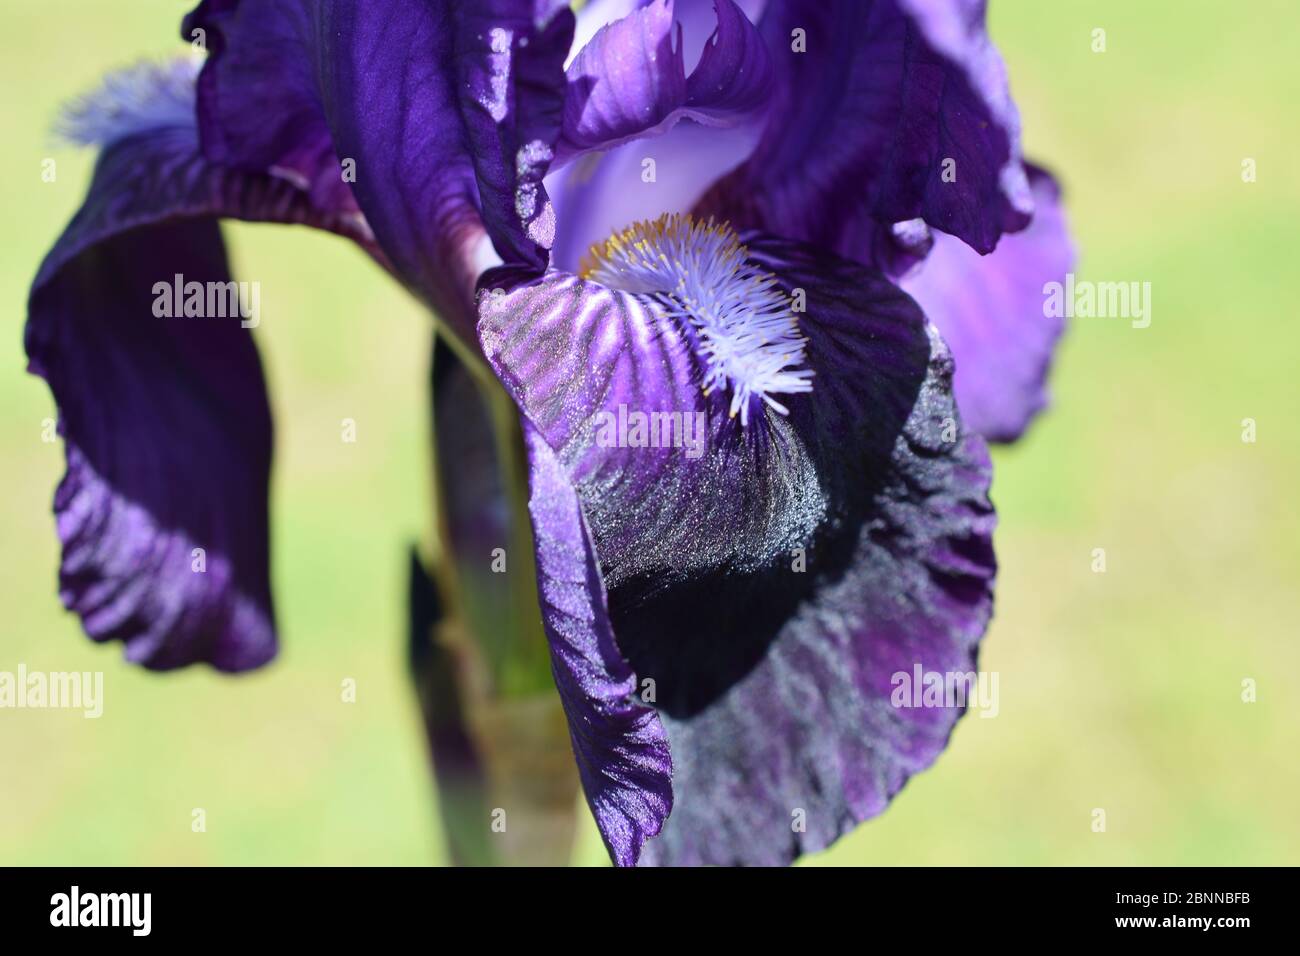 Large dark blue iris flower on a blurred light yellow and green background Stock Photo